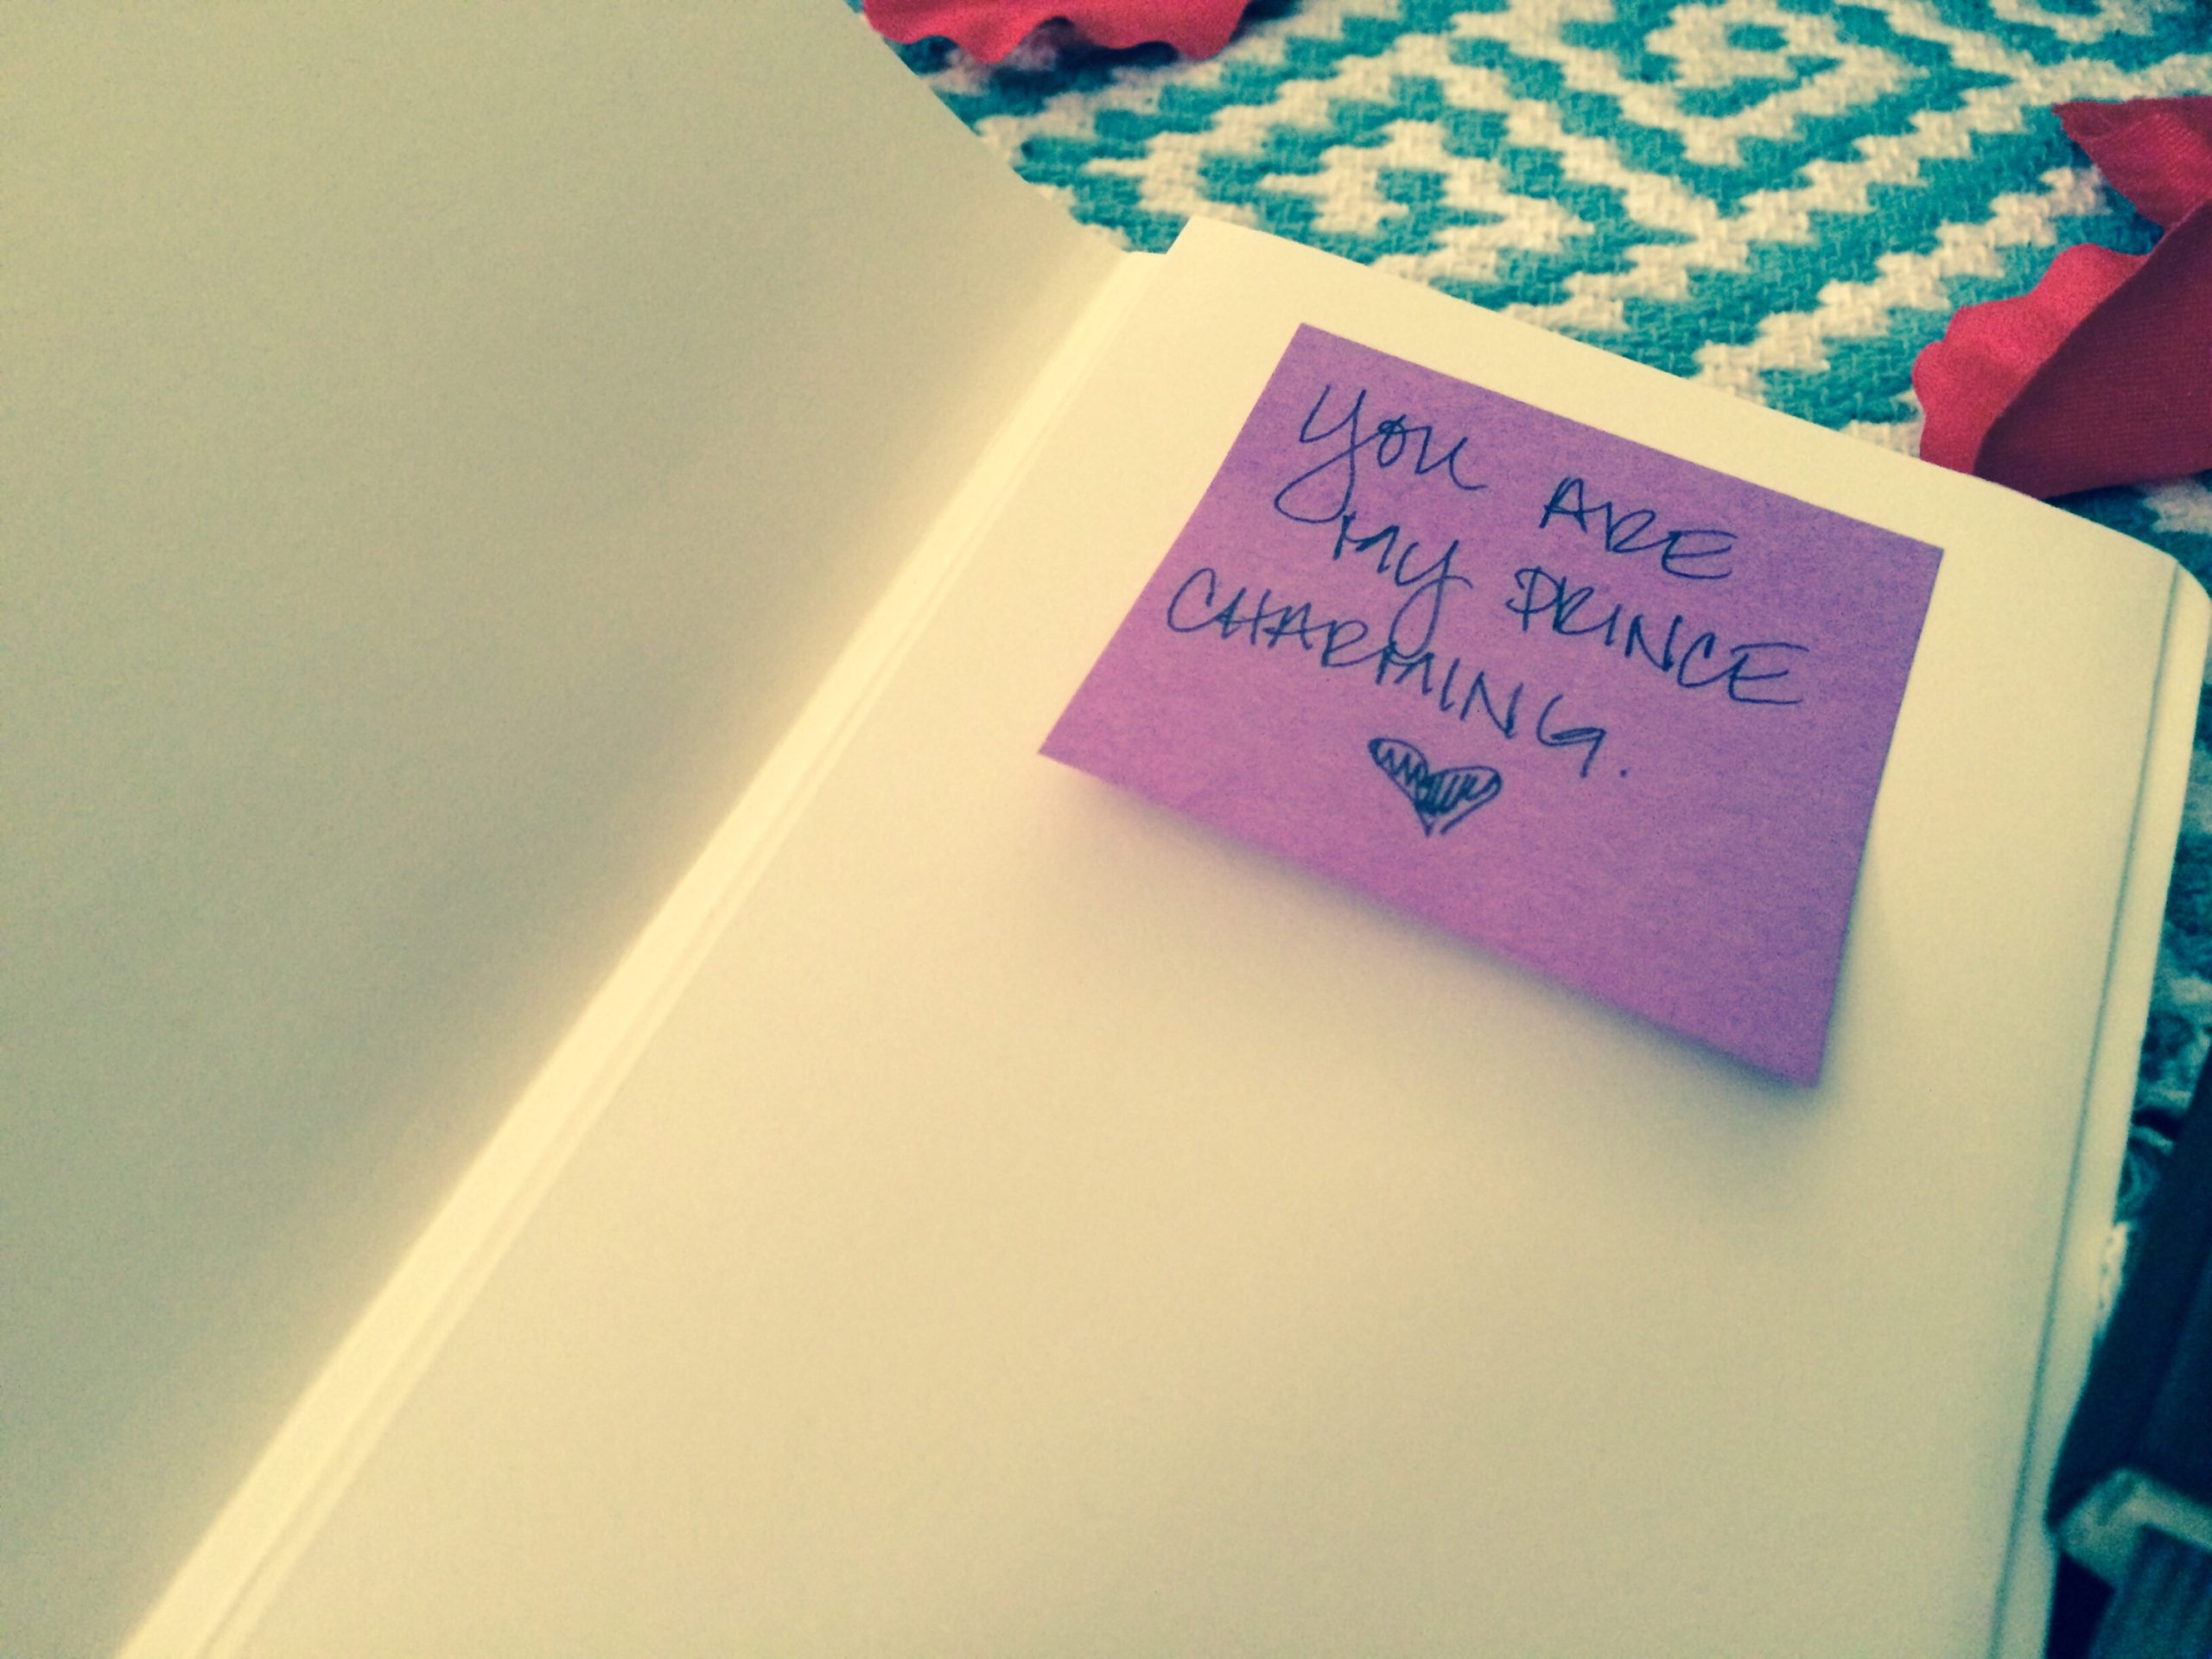 A new notebook with a nice note.